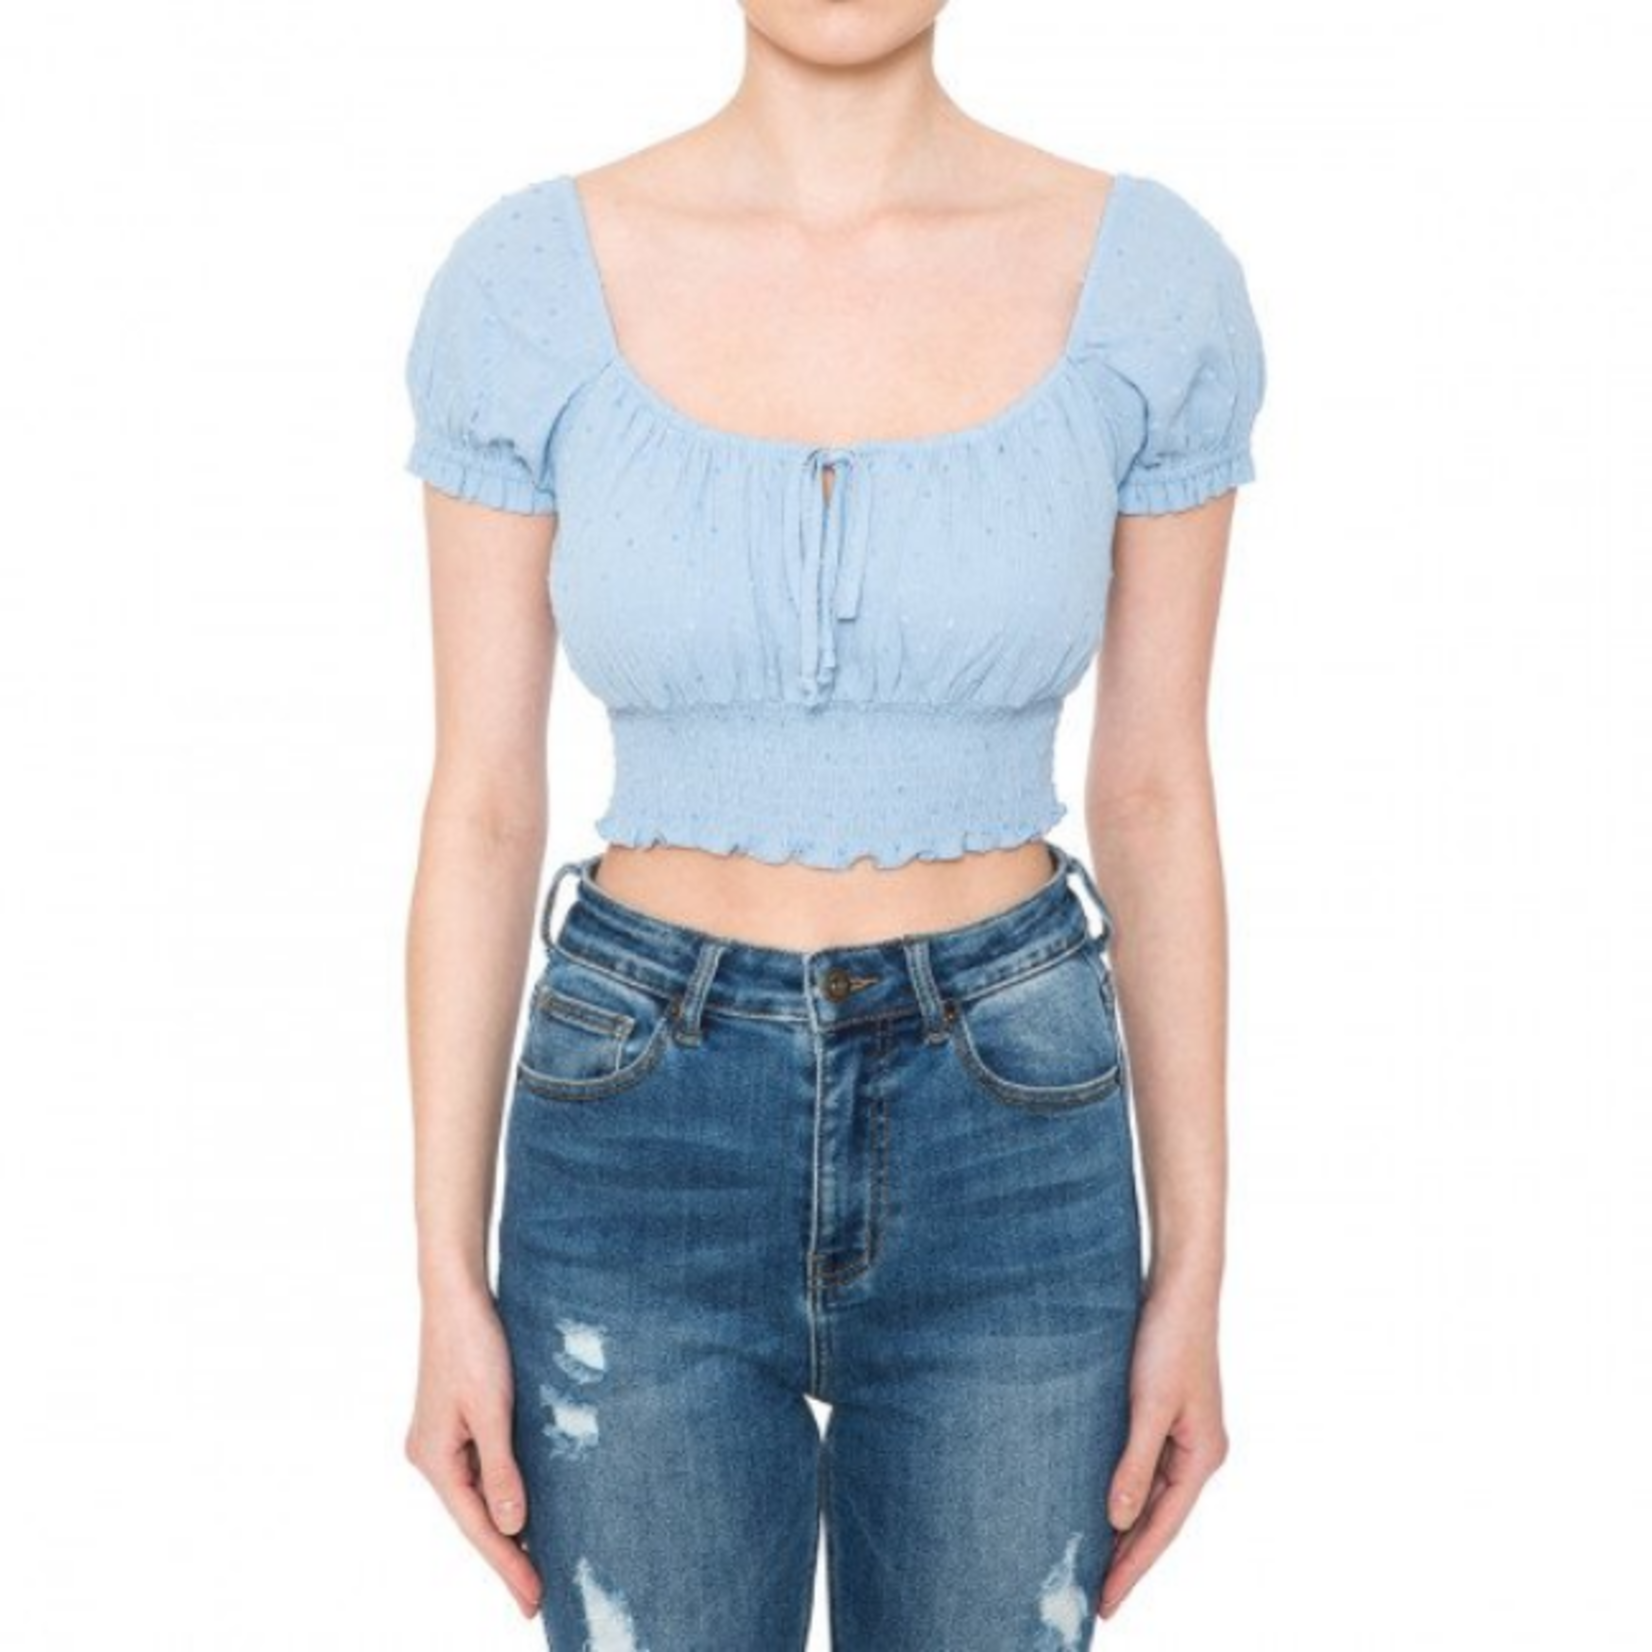 Ambiance Apparel Ambiance - Women Keyhole Neck Crop Top - 73340